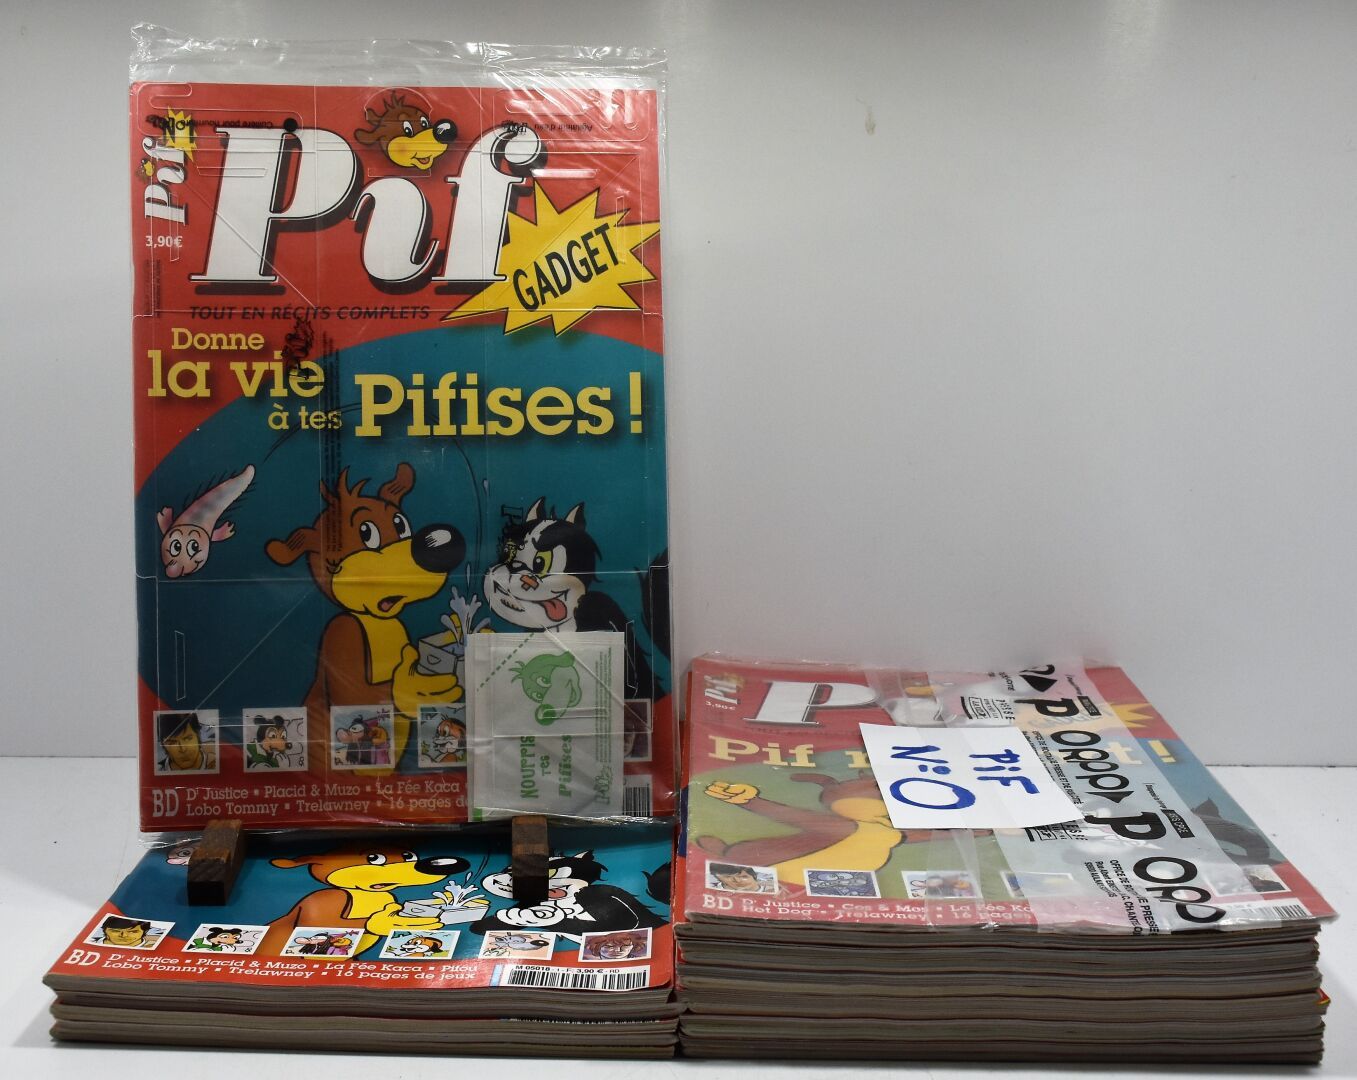 Null PIF GADGET - 2004 / 2005 / 18 issues (0 to 18)

Missing Pif N° 2 and 18 - M&hellip;